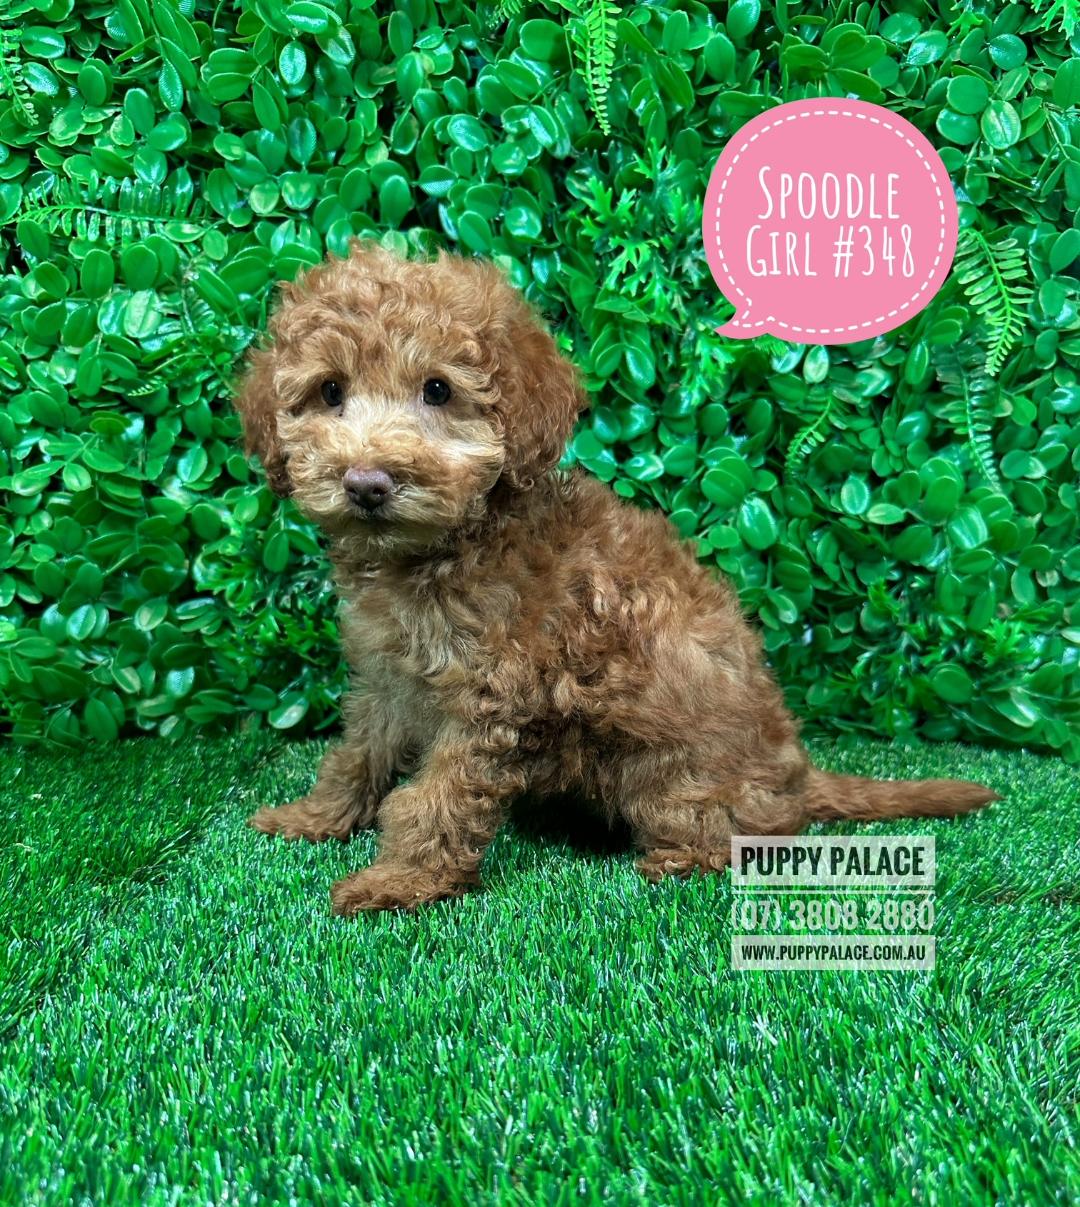 $1895 – Ruby Spoodle / Cockerpoo (Chocolate Spoodle X Red Toy Poodle) – Ruby Girl. My 2nd VACCINATION HAS BEEN DONE. VALUE $100